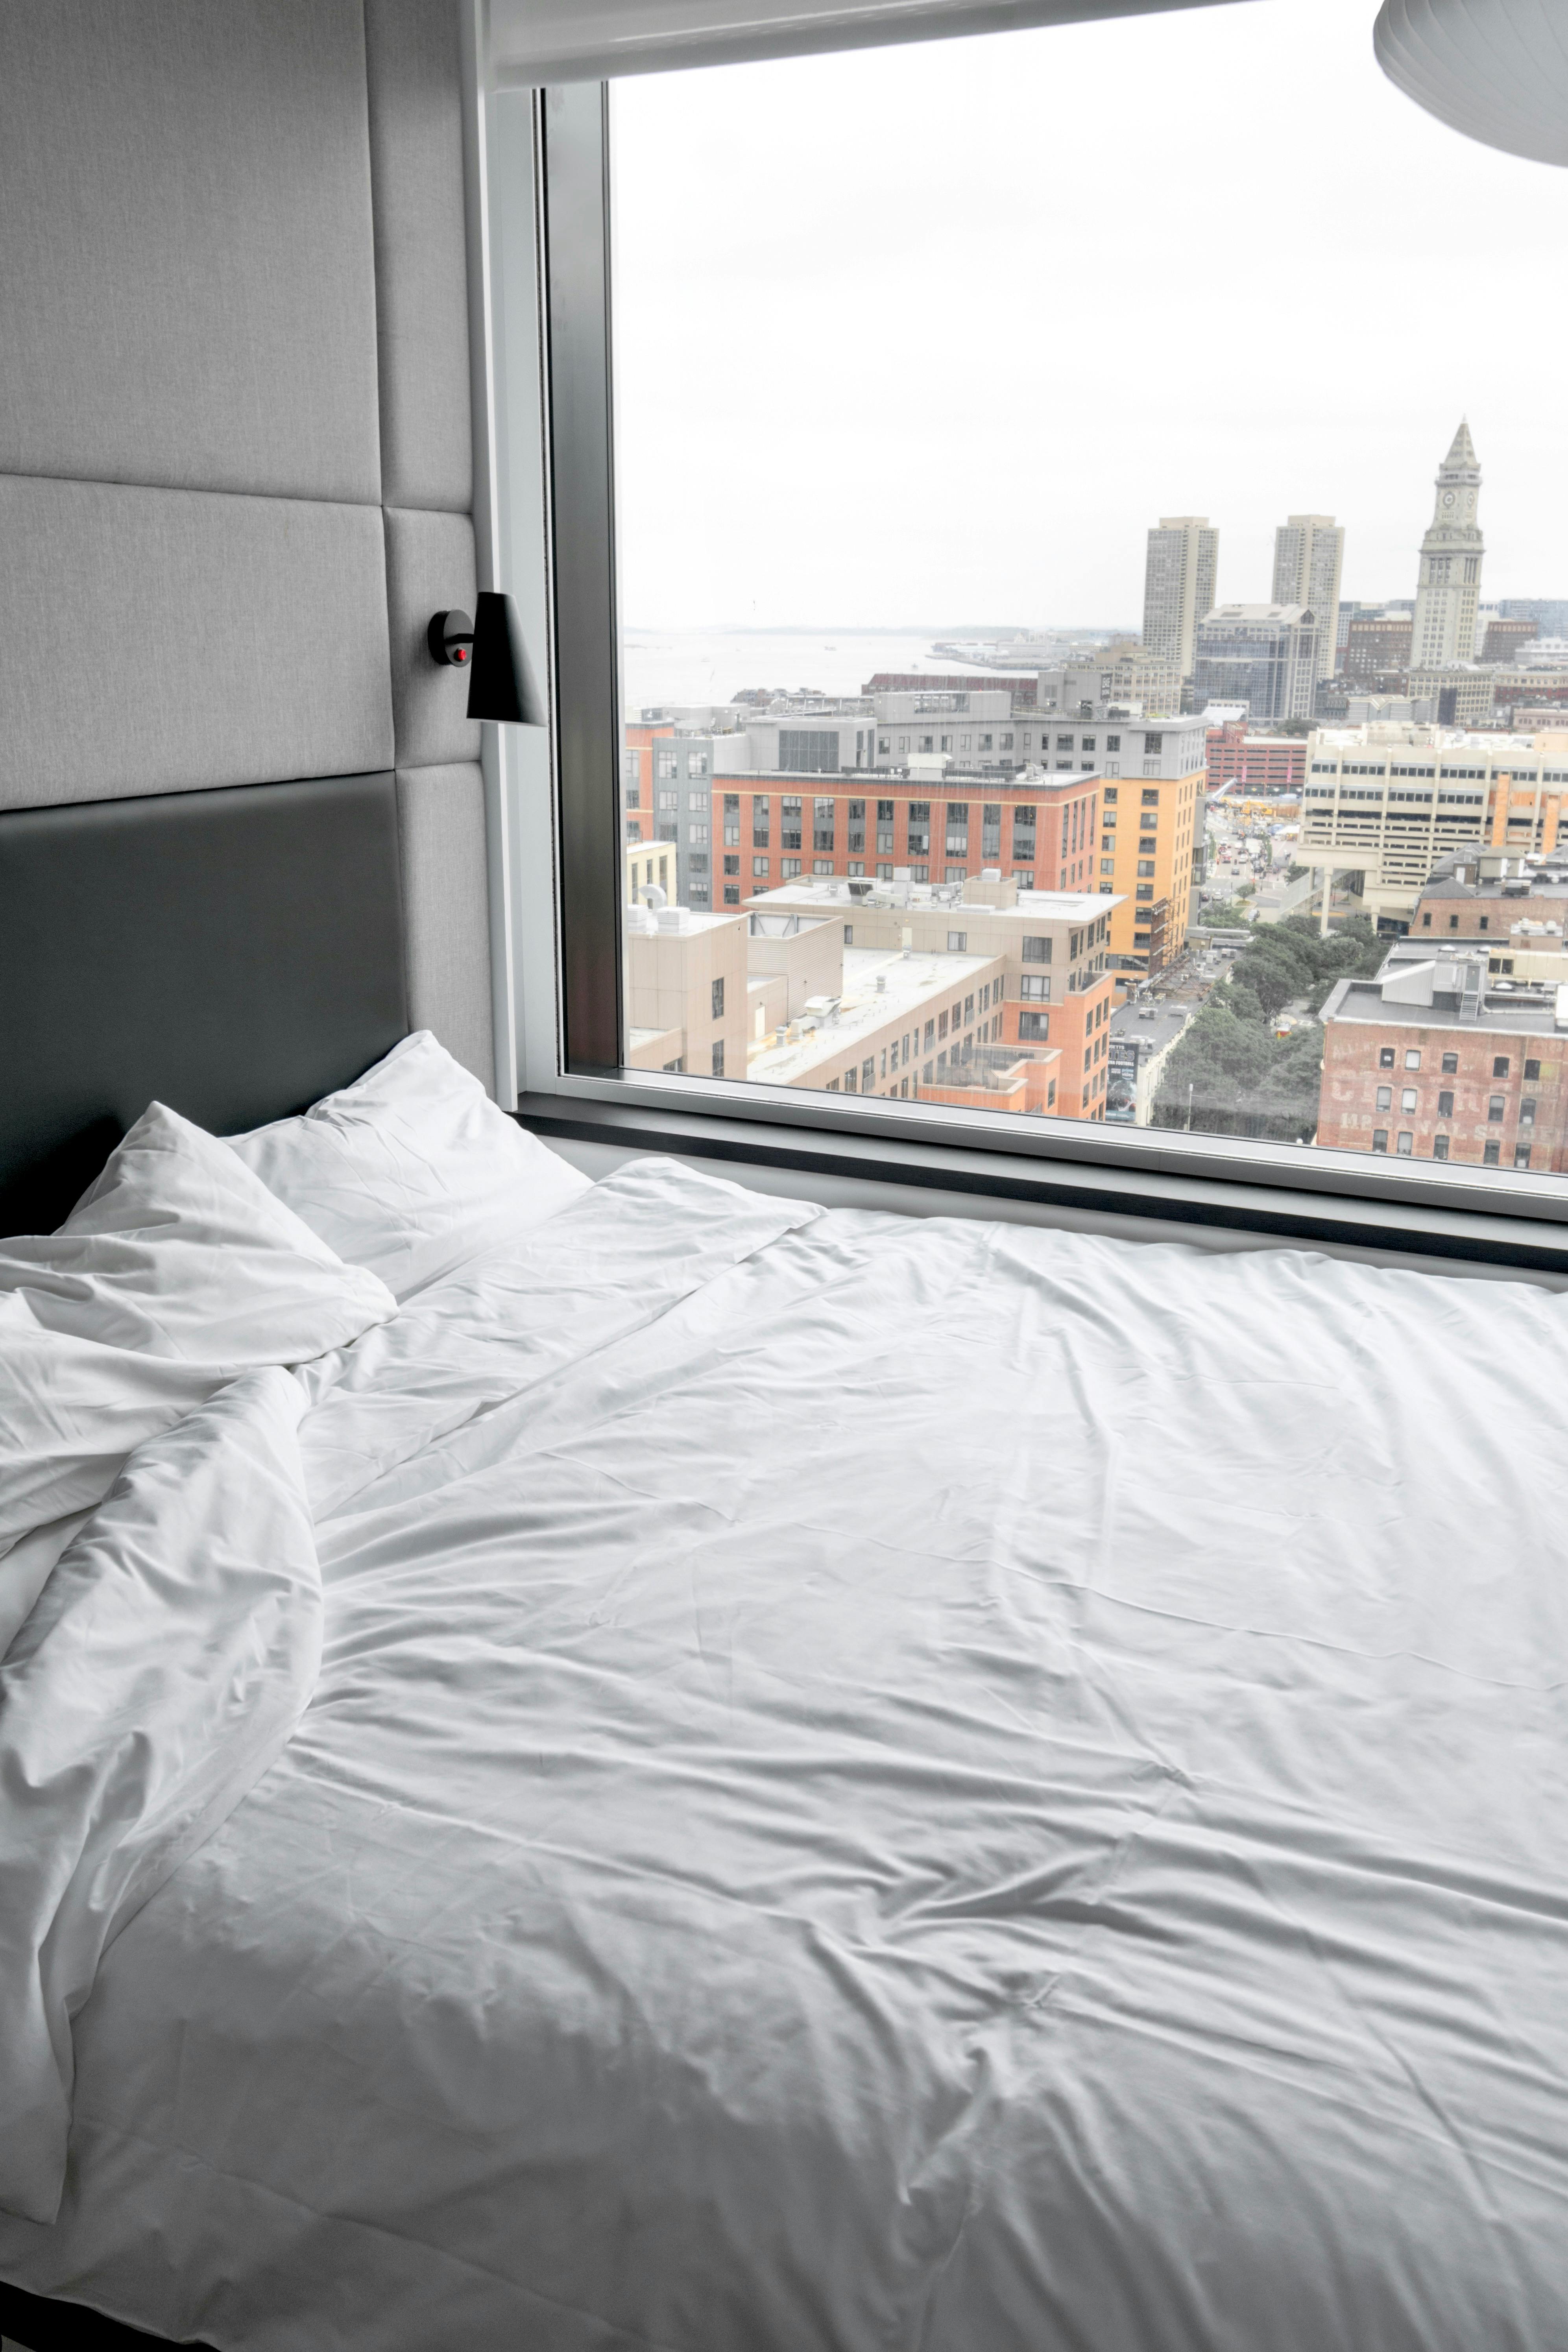 A Bedroom With A City View Free Stock Photo